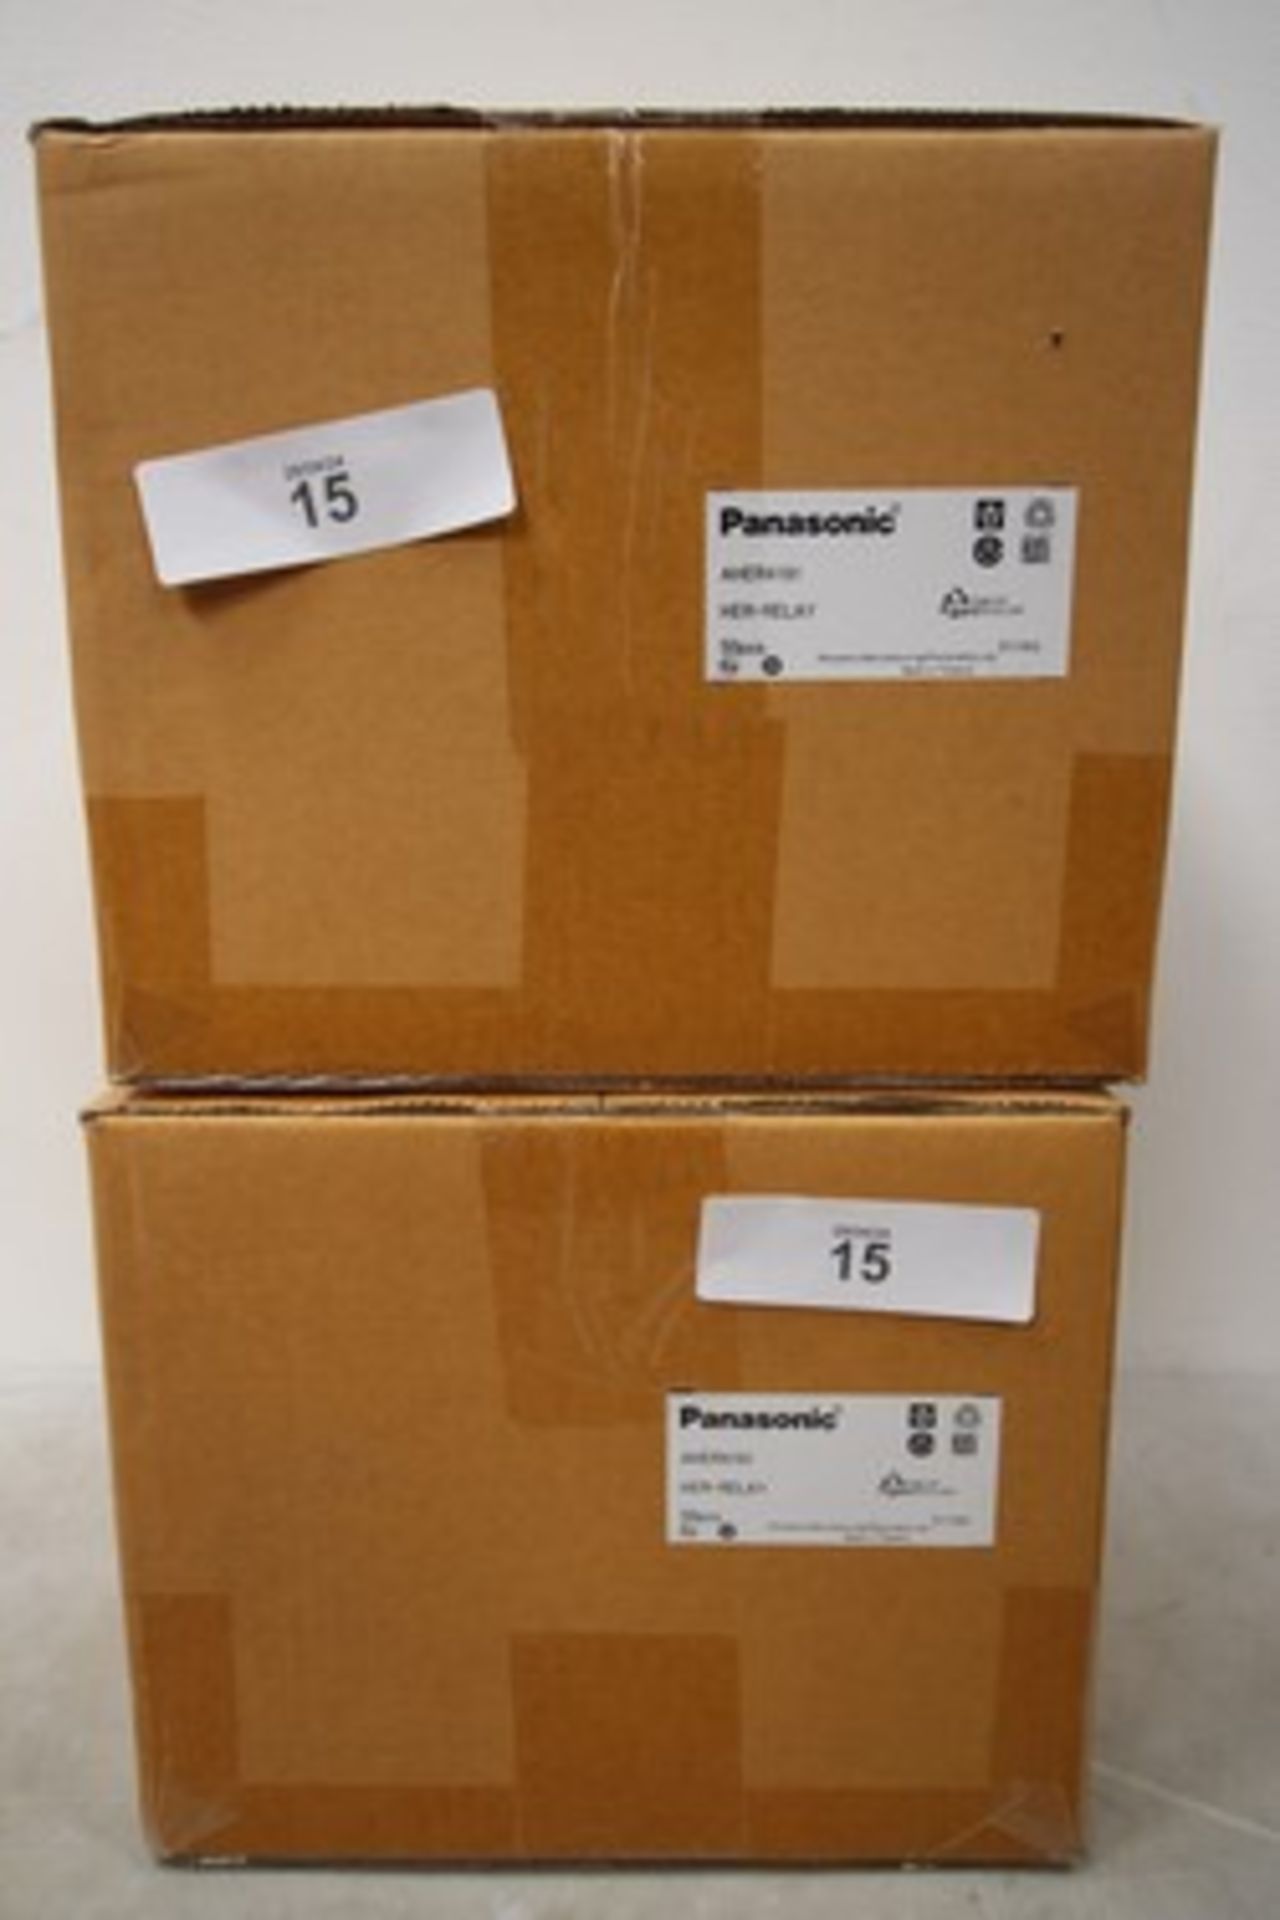 2 x Panasonic power relays, Model AHWER4191 - Sealed new in box (ES17)